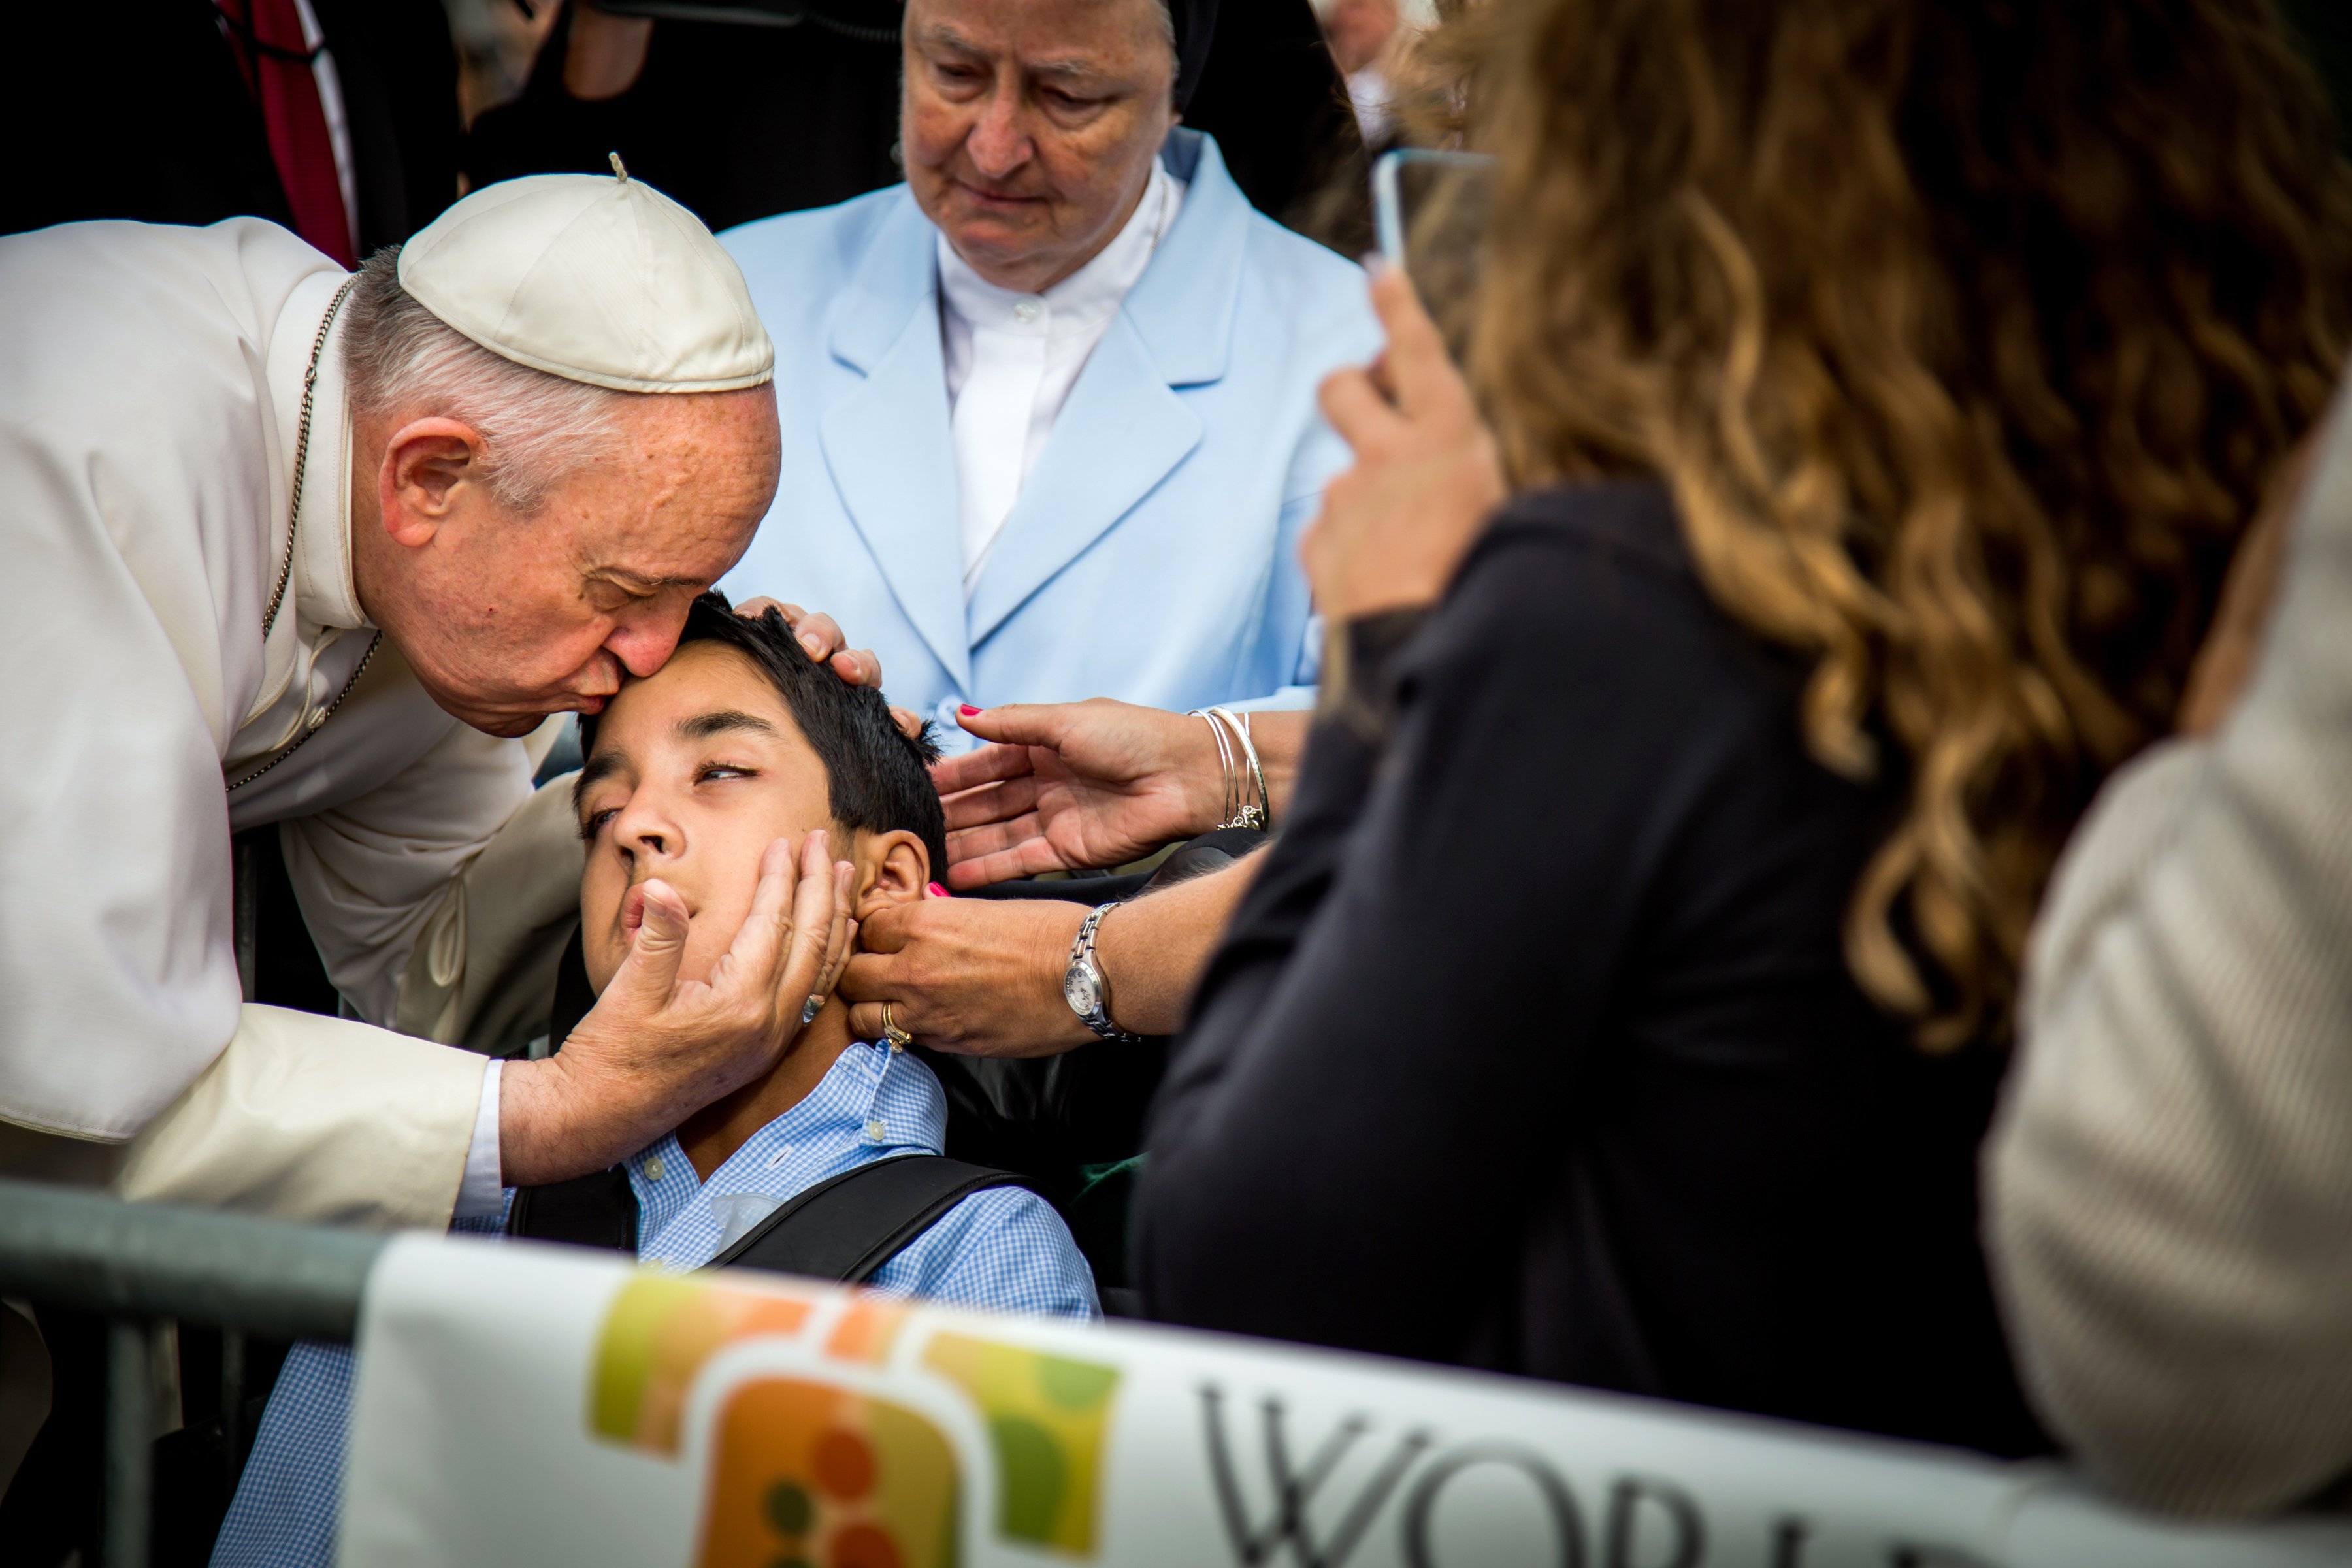 Pope Francis kisses and blesses Michael Keating, 10, of Elverson, Pa after arriving in Philadelphia and exiting his car when he saw the boy, Saturday, Sept. 26, 2015, at Philadelphia International Airport.